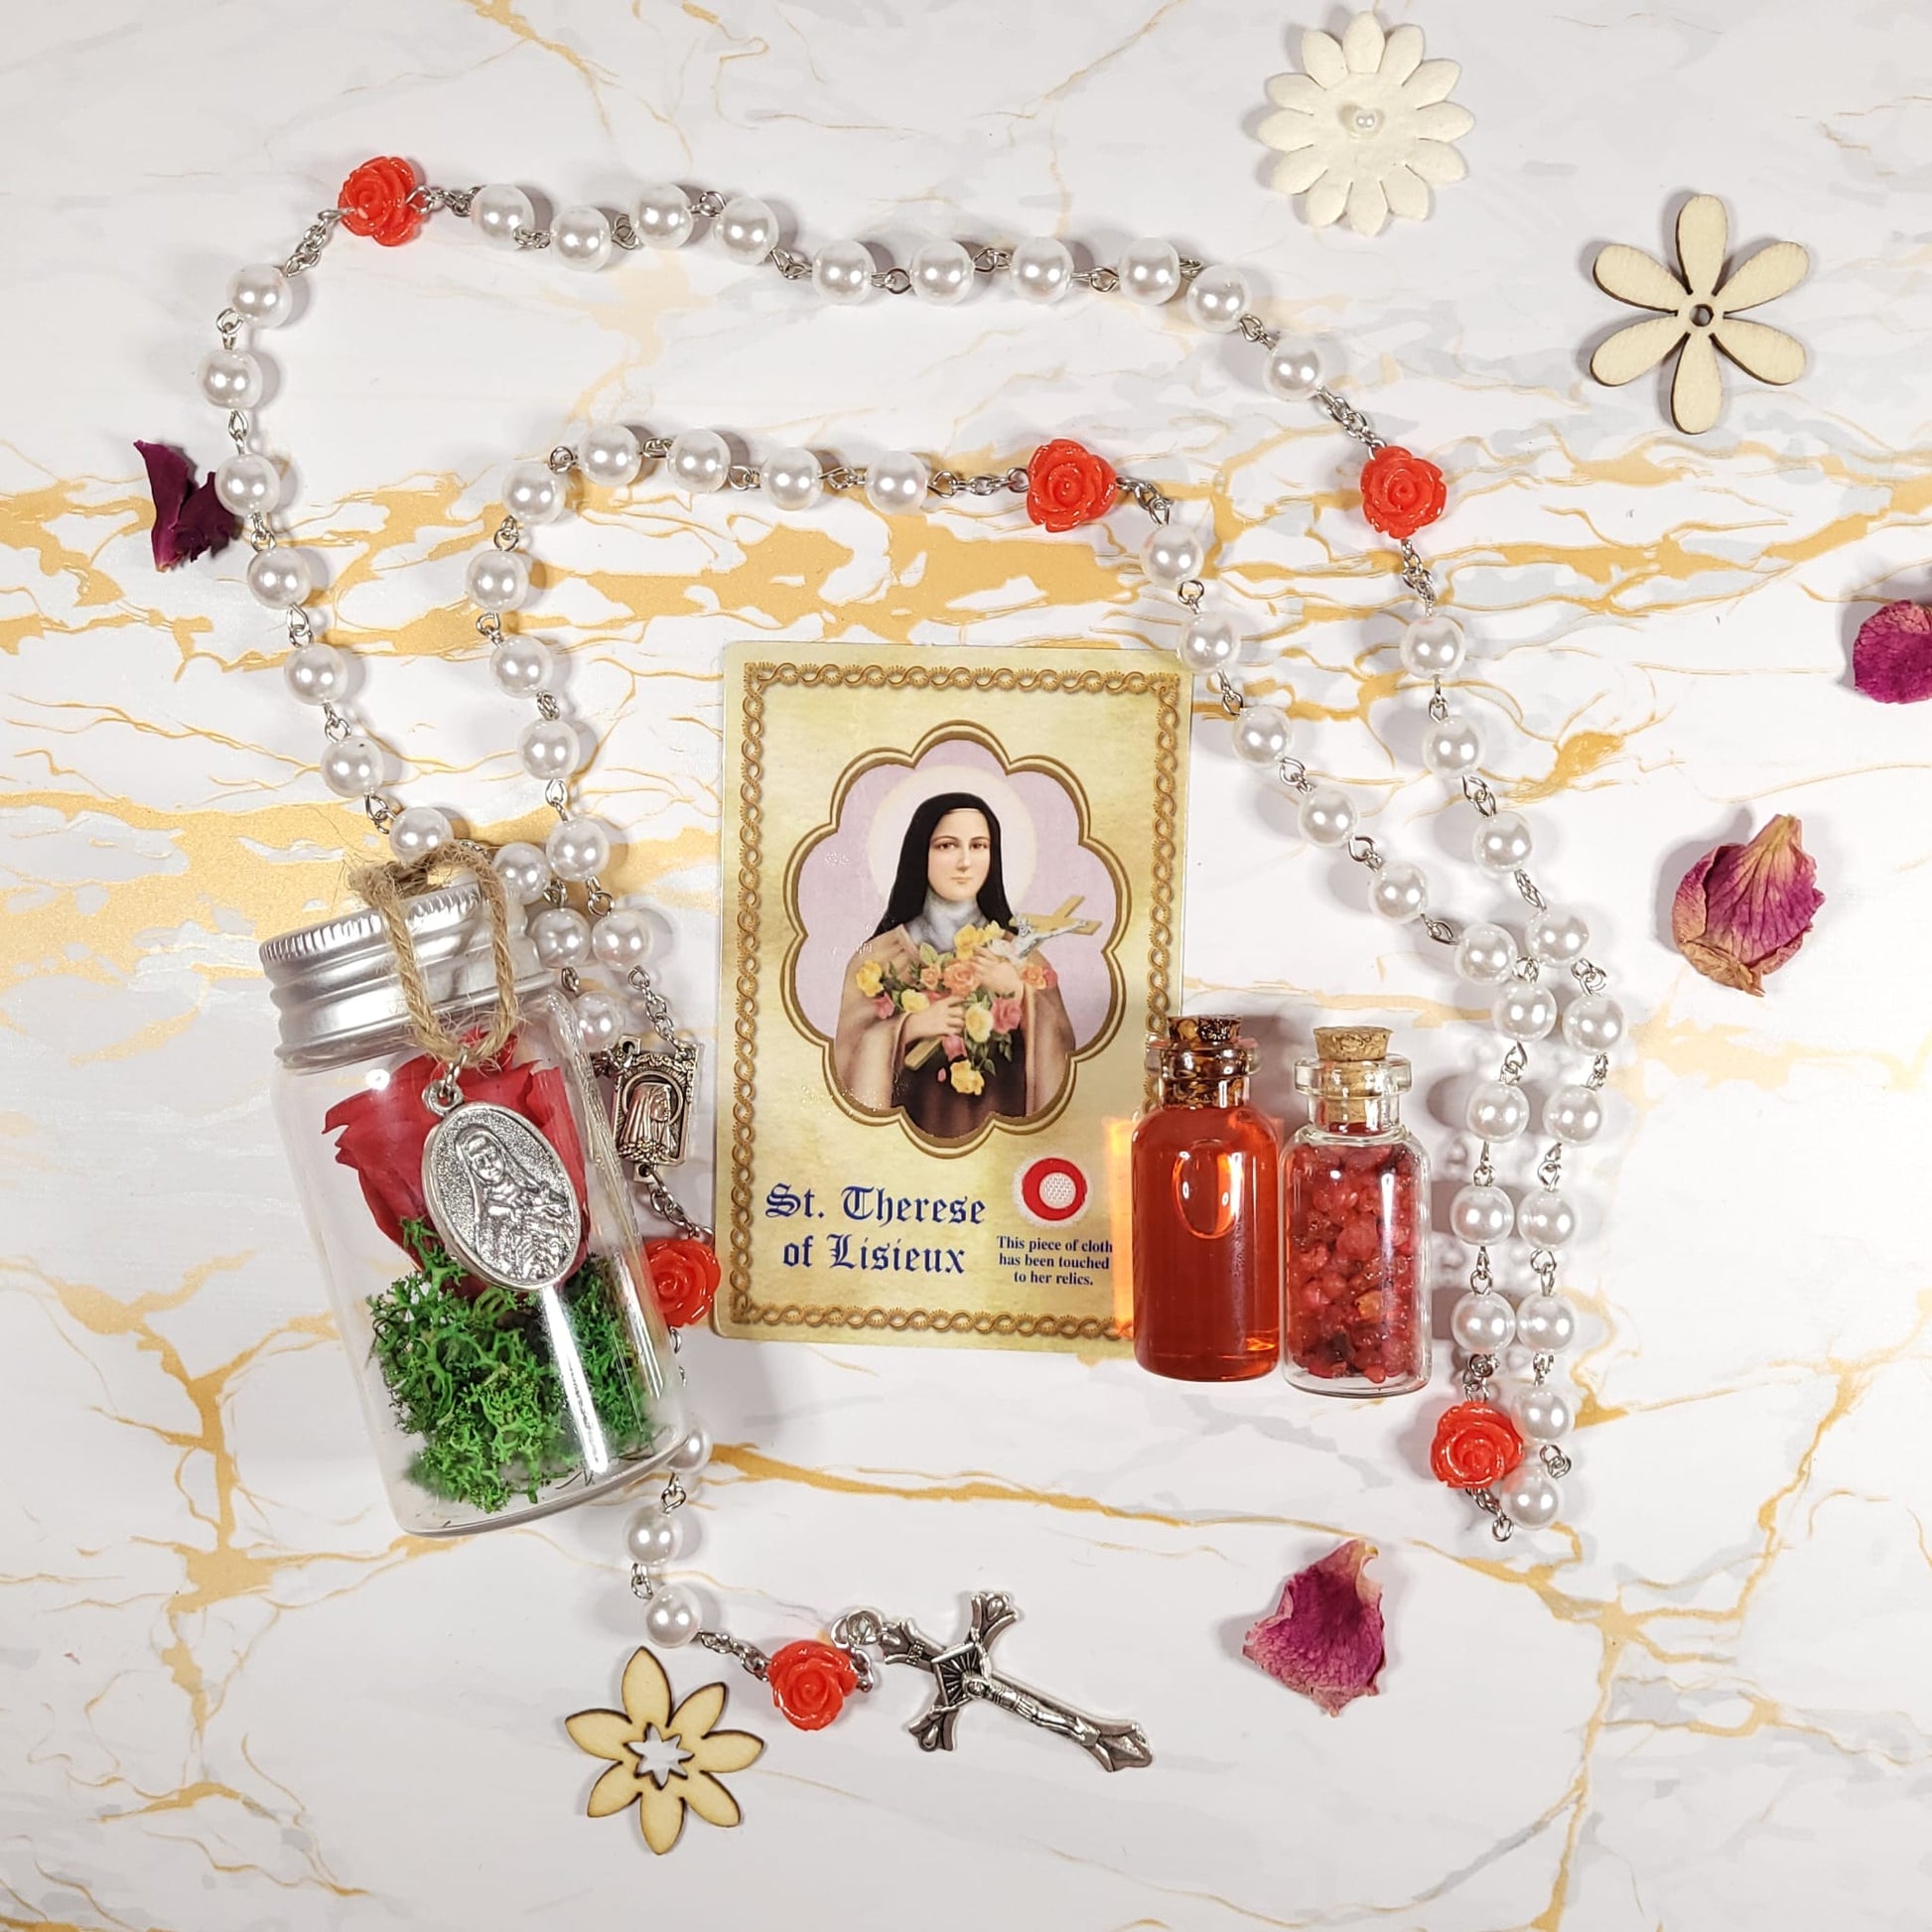 Saint Therese de Lisieux Set - relic oil, rose incense, rose medal, rosary and relic card - Our Lady of Gifts